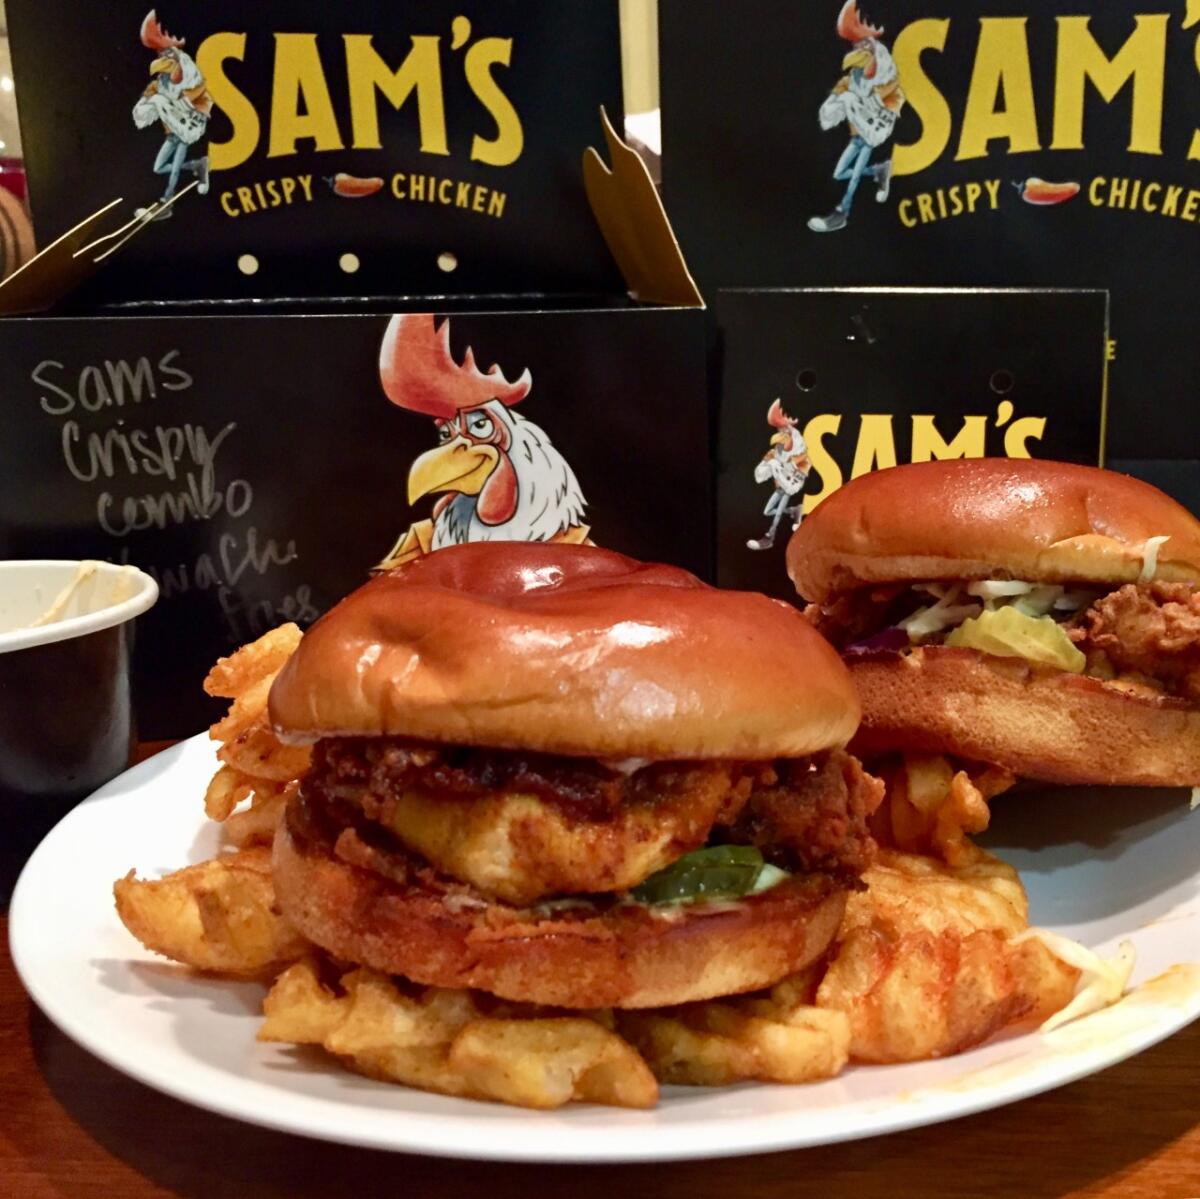 The delivery-only concept of Sam's Crispy Chicken, which has a branch in Costa Mesa, seemed novel when it opened a couple of weeks ago. Then, all restaurants became take-out and delivery only.